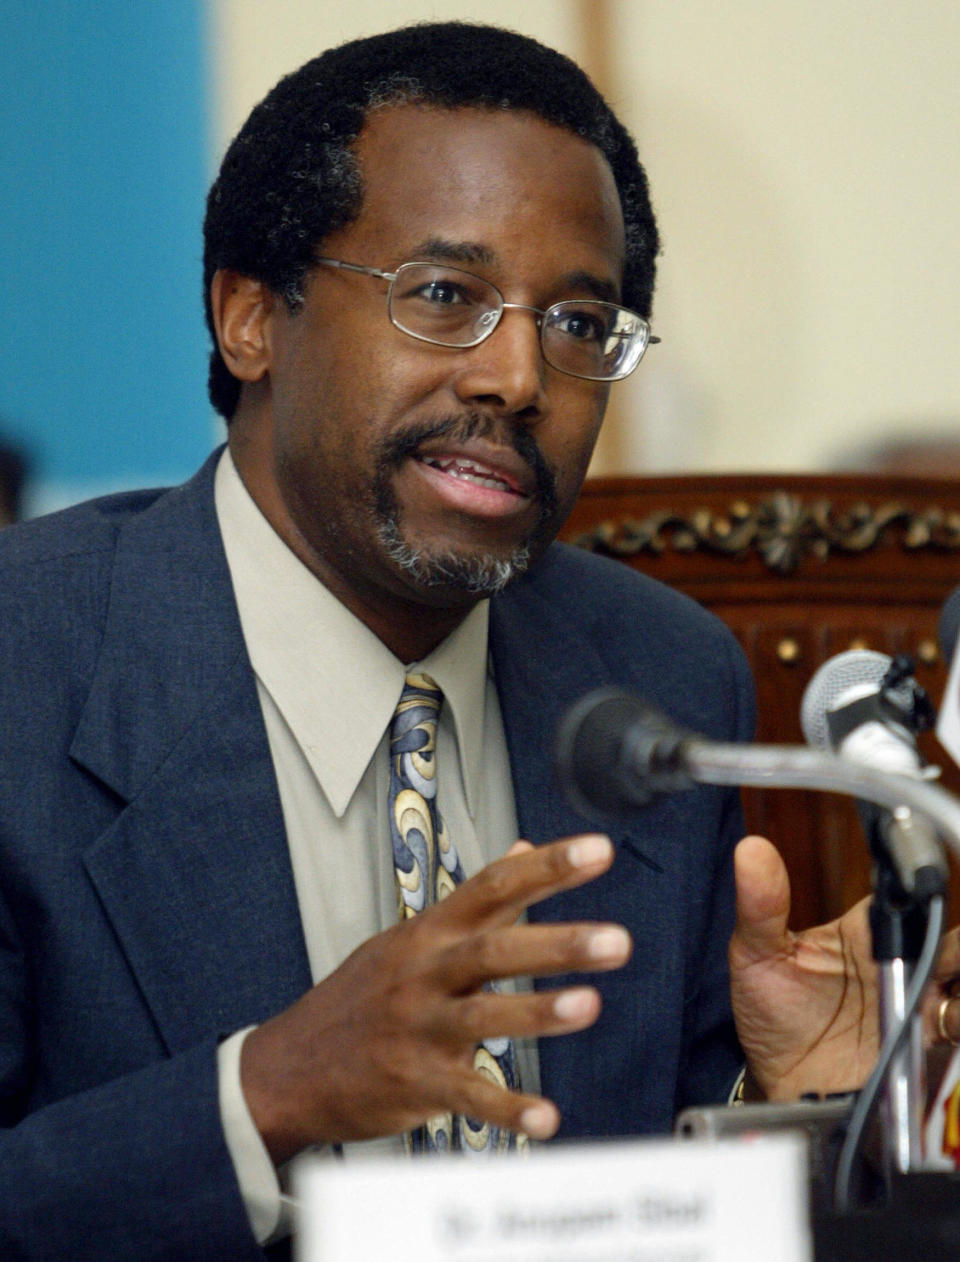 US neurosurgeon Benjamin Carson addresses a press conference at the Indraprashtra Apollo Hospital in New Delhi, 04 October 2005. Carson is ready to separate ten-year-old Indian twins Sabah and Farah joined at the head as soon as their parents give permission, an Indian hospital official said. Carson and a team of 20 specialists approved the procedure after studying an angiogram of the brains of the twins at the Indraprastha Apollo Hospital in the Indian capital, said medical director Anupam Sibal. But the final decision rests with the parents of the twins, who were to return to Patna, capital of the impoverished eastern Indian state of Bihar, to consult with friends and family, Sibal told a media conference at the hospital.